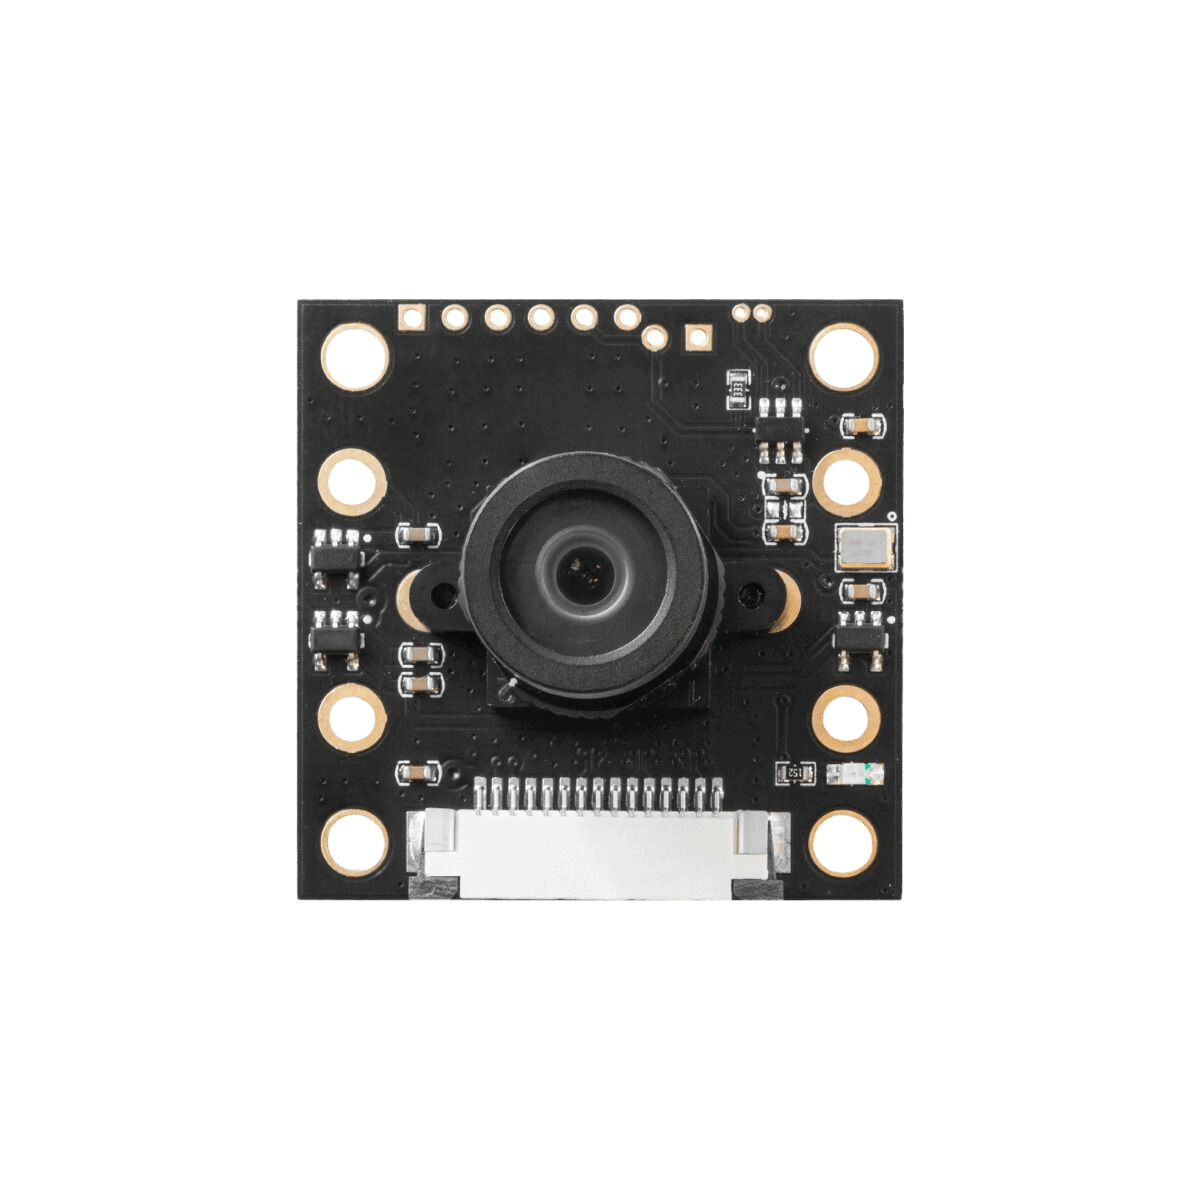 top view of the B0035 camera module for raspberry pi